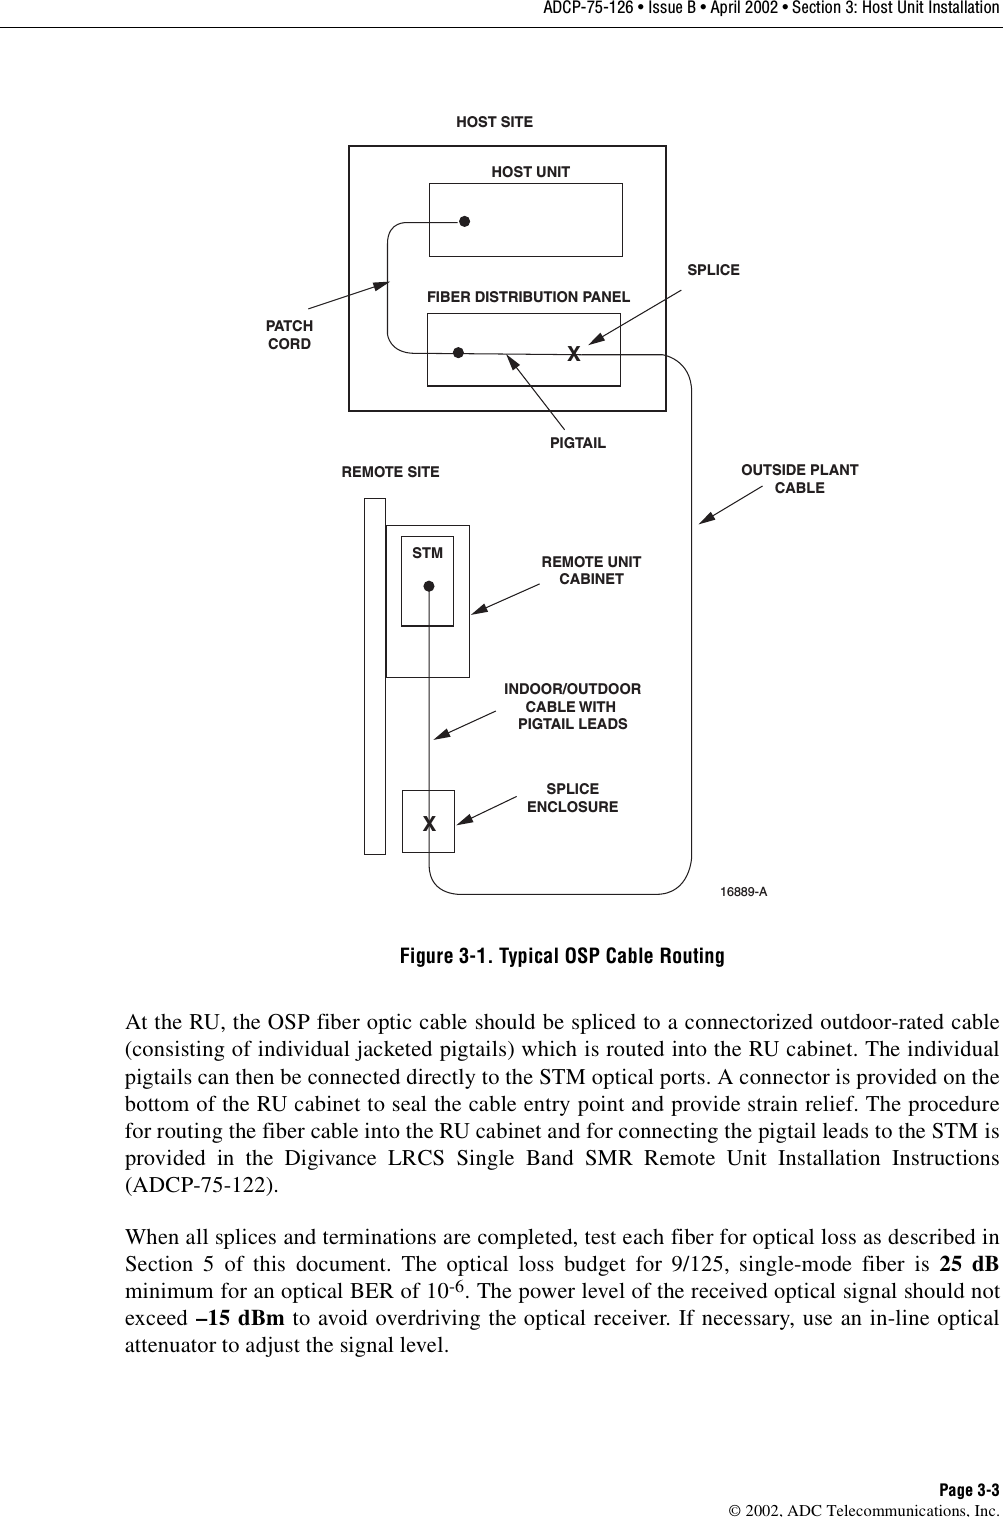 ADCP-75-126 • Issue B • April 2002 • Section 3: Host Unit InstallationPage 3-3©2002, ADC Telecommunications, Inc.Figure 3-1. Typical OSP Cable RoutingAt the RU, the OSP fiber optic cable should be spliced to aconnectorized outdoor-rated cable(consisting of individual jacketed pigtails) which is routed into the RU cabinet. The individualpigtails can then be connected directly to the STM optical ports. Aconnector is provided on thebottom of the RU cabinet to seal the cable entry point and provide strain relief. The procedurefor routing the fiber cable into the RU cabinet and for connecting the pigtail leads to the STM isprovided in the Digivance LRCS Single Band SMR Remote Unit Installation Instructions(ADCP-75-122).When all splices and terminations are completed, test each fiber for optical loss as described inSection 5 of this document. The optical loss budget for 9/125, single-mode fiber is 25 dBminimum for an optical BER of 10-6.The power level of the received optical signal should notexceed –15 dBm to avoid overdriving the optical receiver. If necessary, use an in-line opticalattenuator to adjust the signal level.HOST UNITFIBER DISTRIBUTION PANELXXSTMREMOTE SITEHOST SITEPATCHCORDSPLICEPIGTAILSPLICEENCLOSUREINDOOR/OUTDOORCABLE WITH PIGTAIL LEADSOUTSIDE PLANTCABLEREMOTE UNITCABINET16889-A